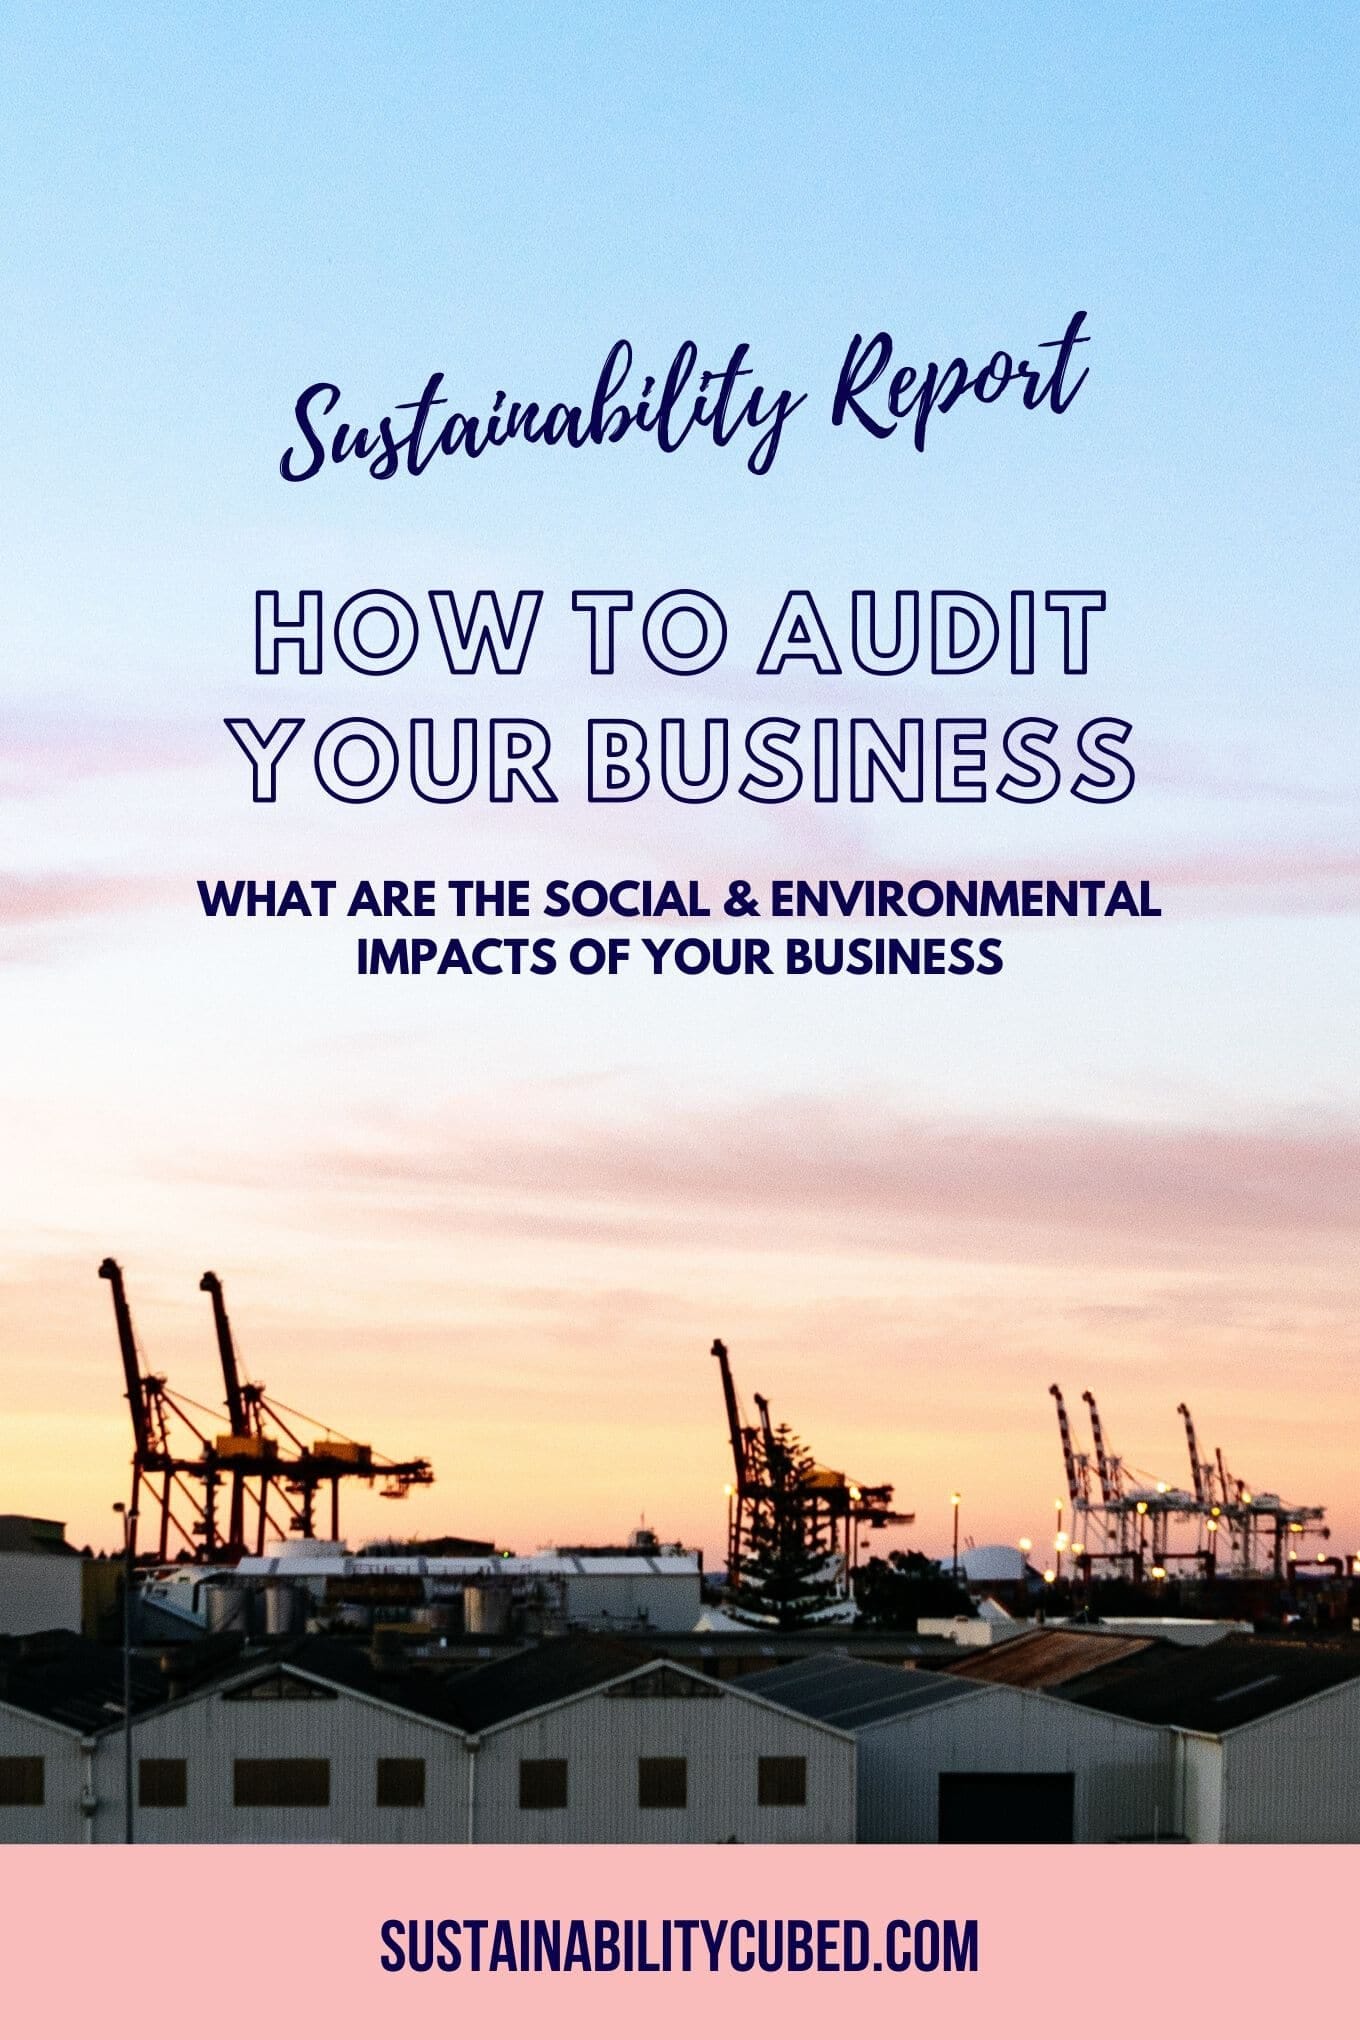 Sustainability Report for Sustainability Cubed